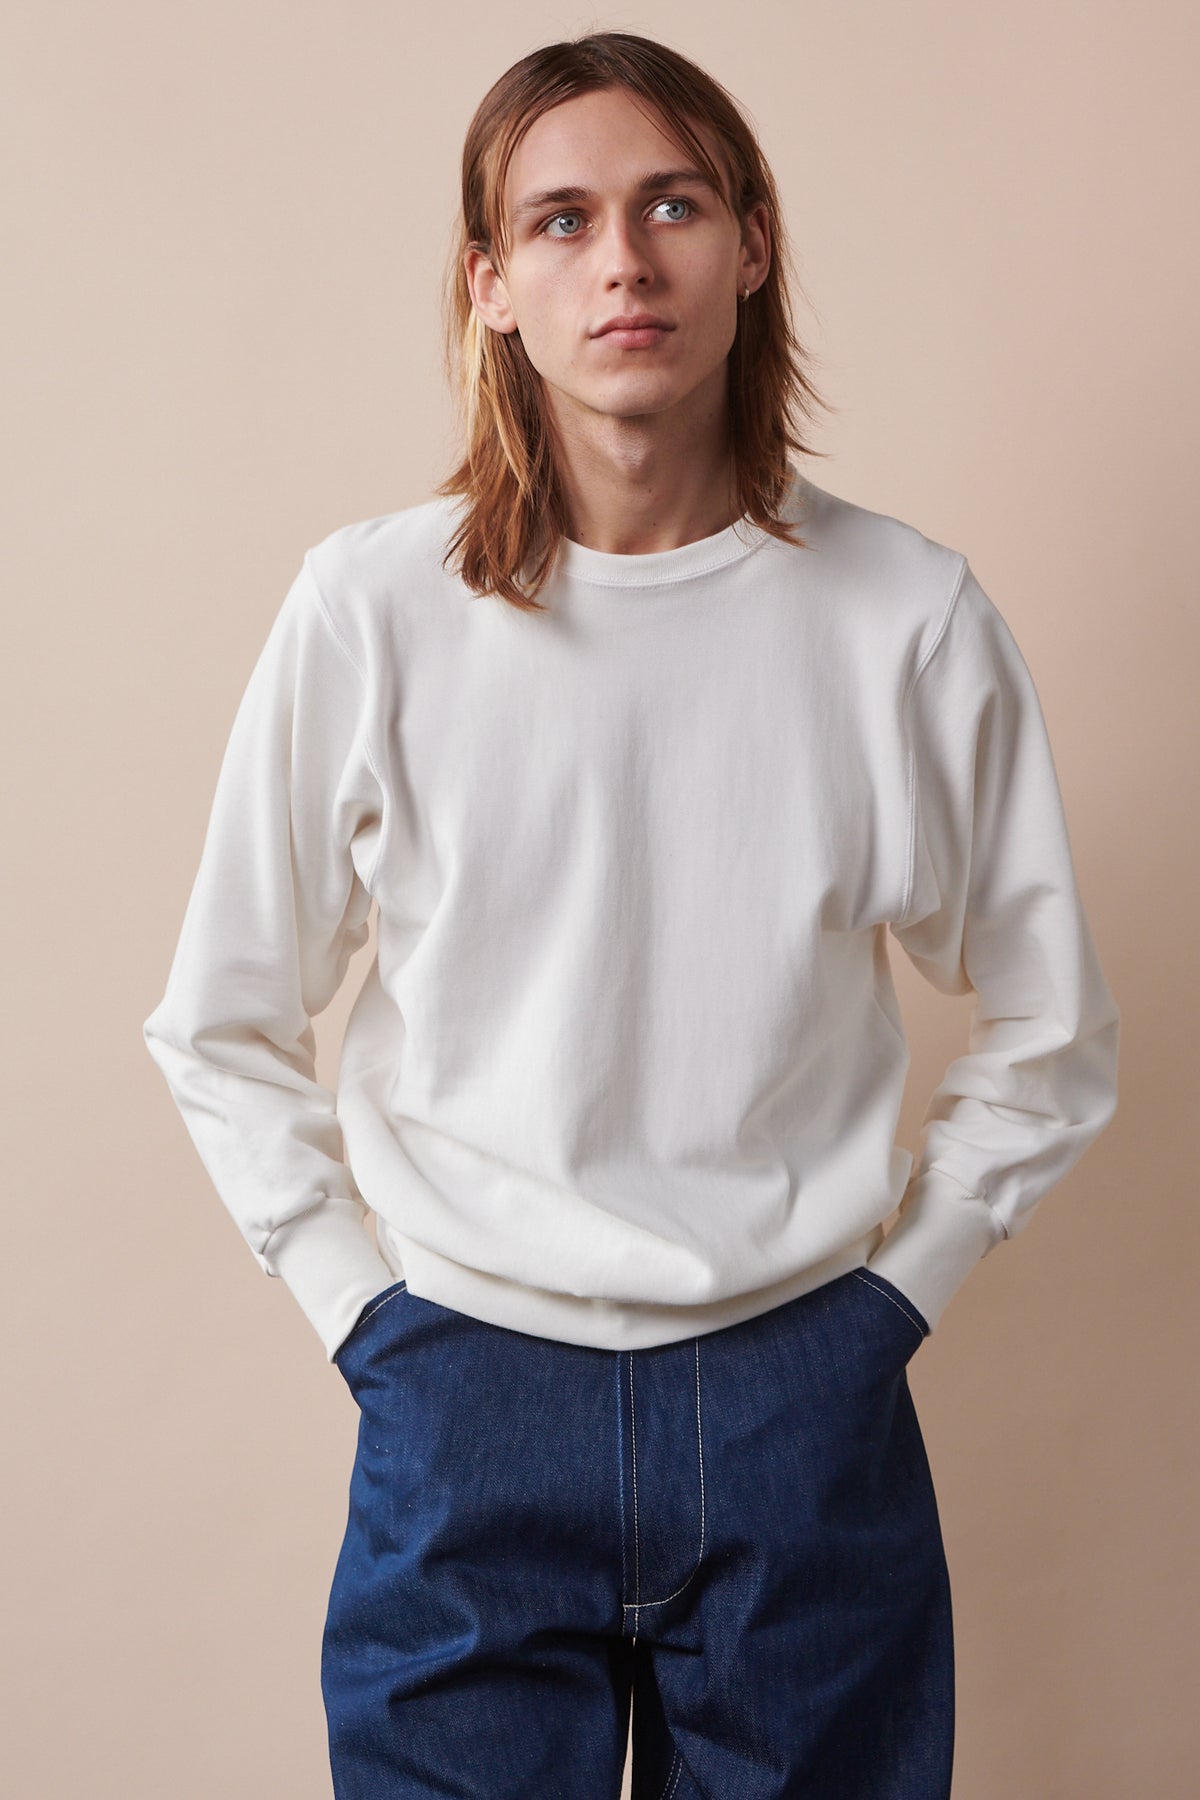 
            Thigh up image of male with shoulder length hair wearing 80s sweatshirt in bone, with hands in pockets of blue jeans